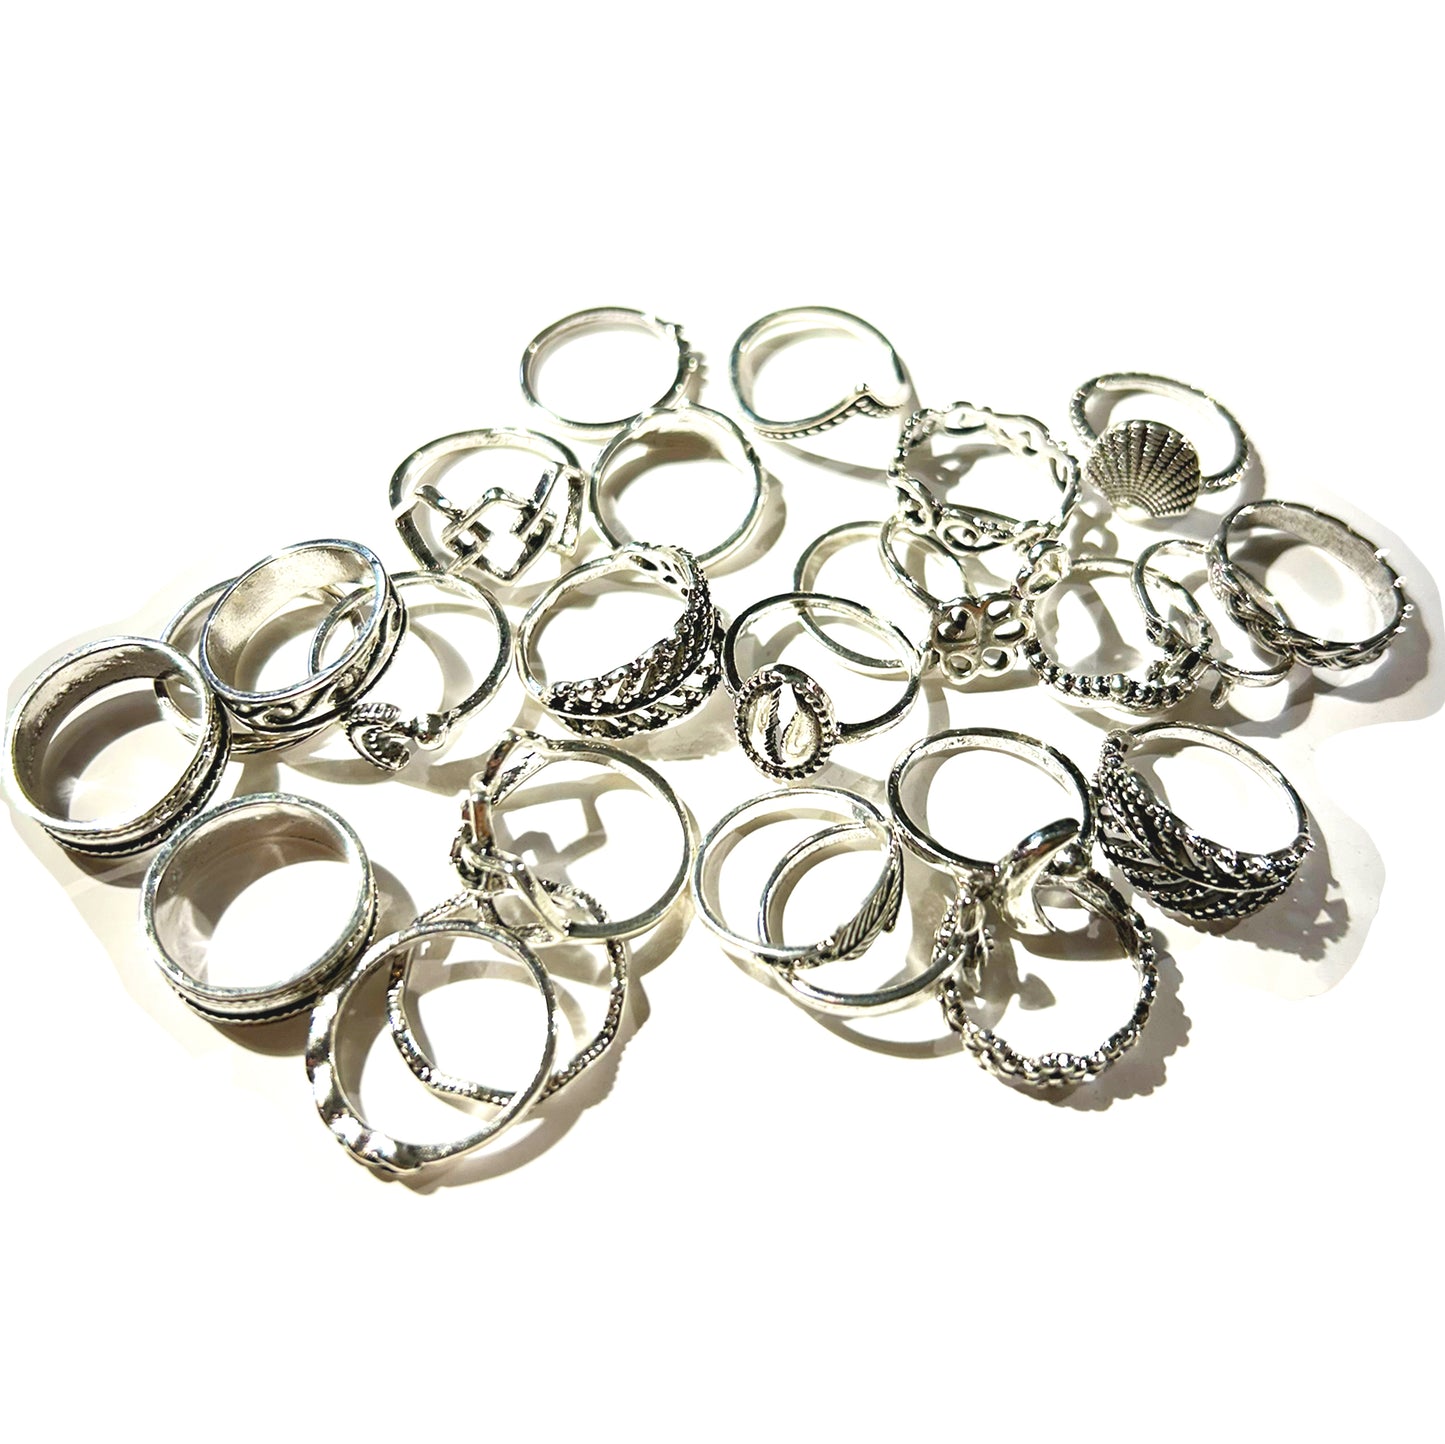 Gold and Silver Statement Rings 5 Per Set Mix and Match